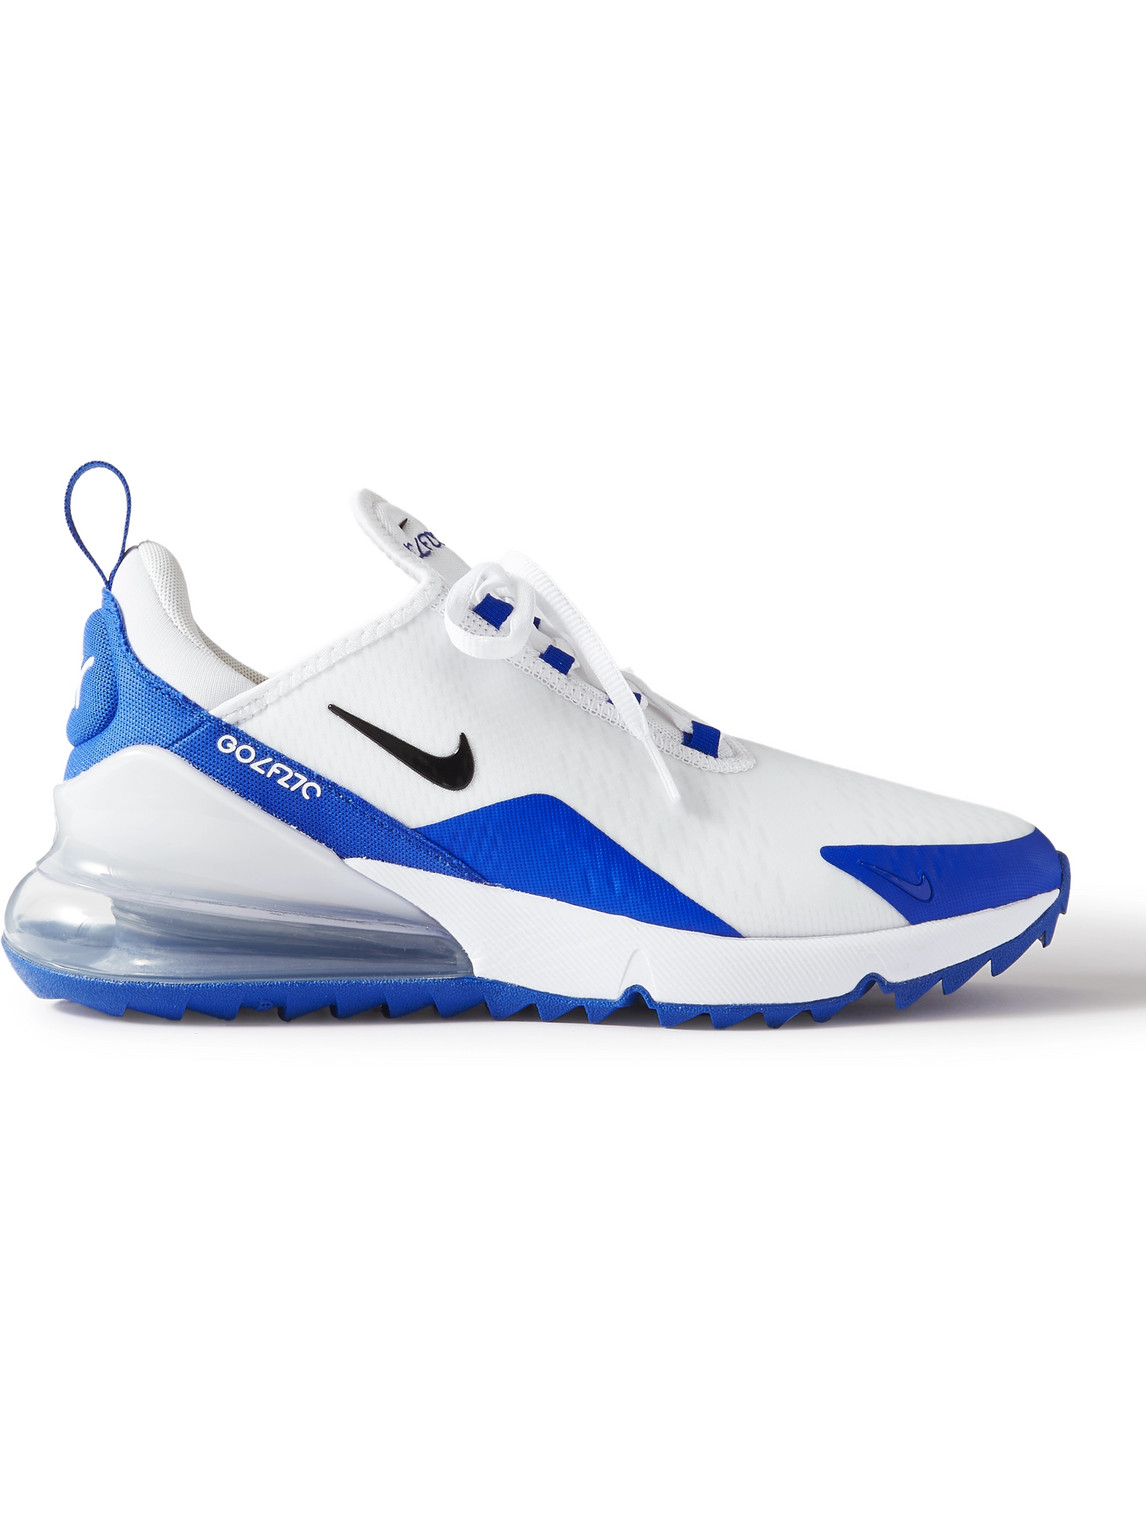 NIKE AIR MAX 270 G RUBBER-TRIMMED RIPSTOP AND MESH GOLF SHOES